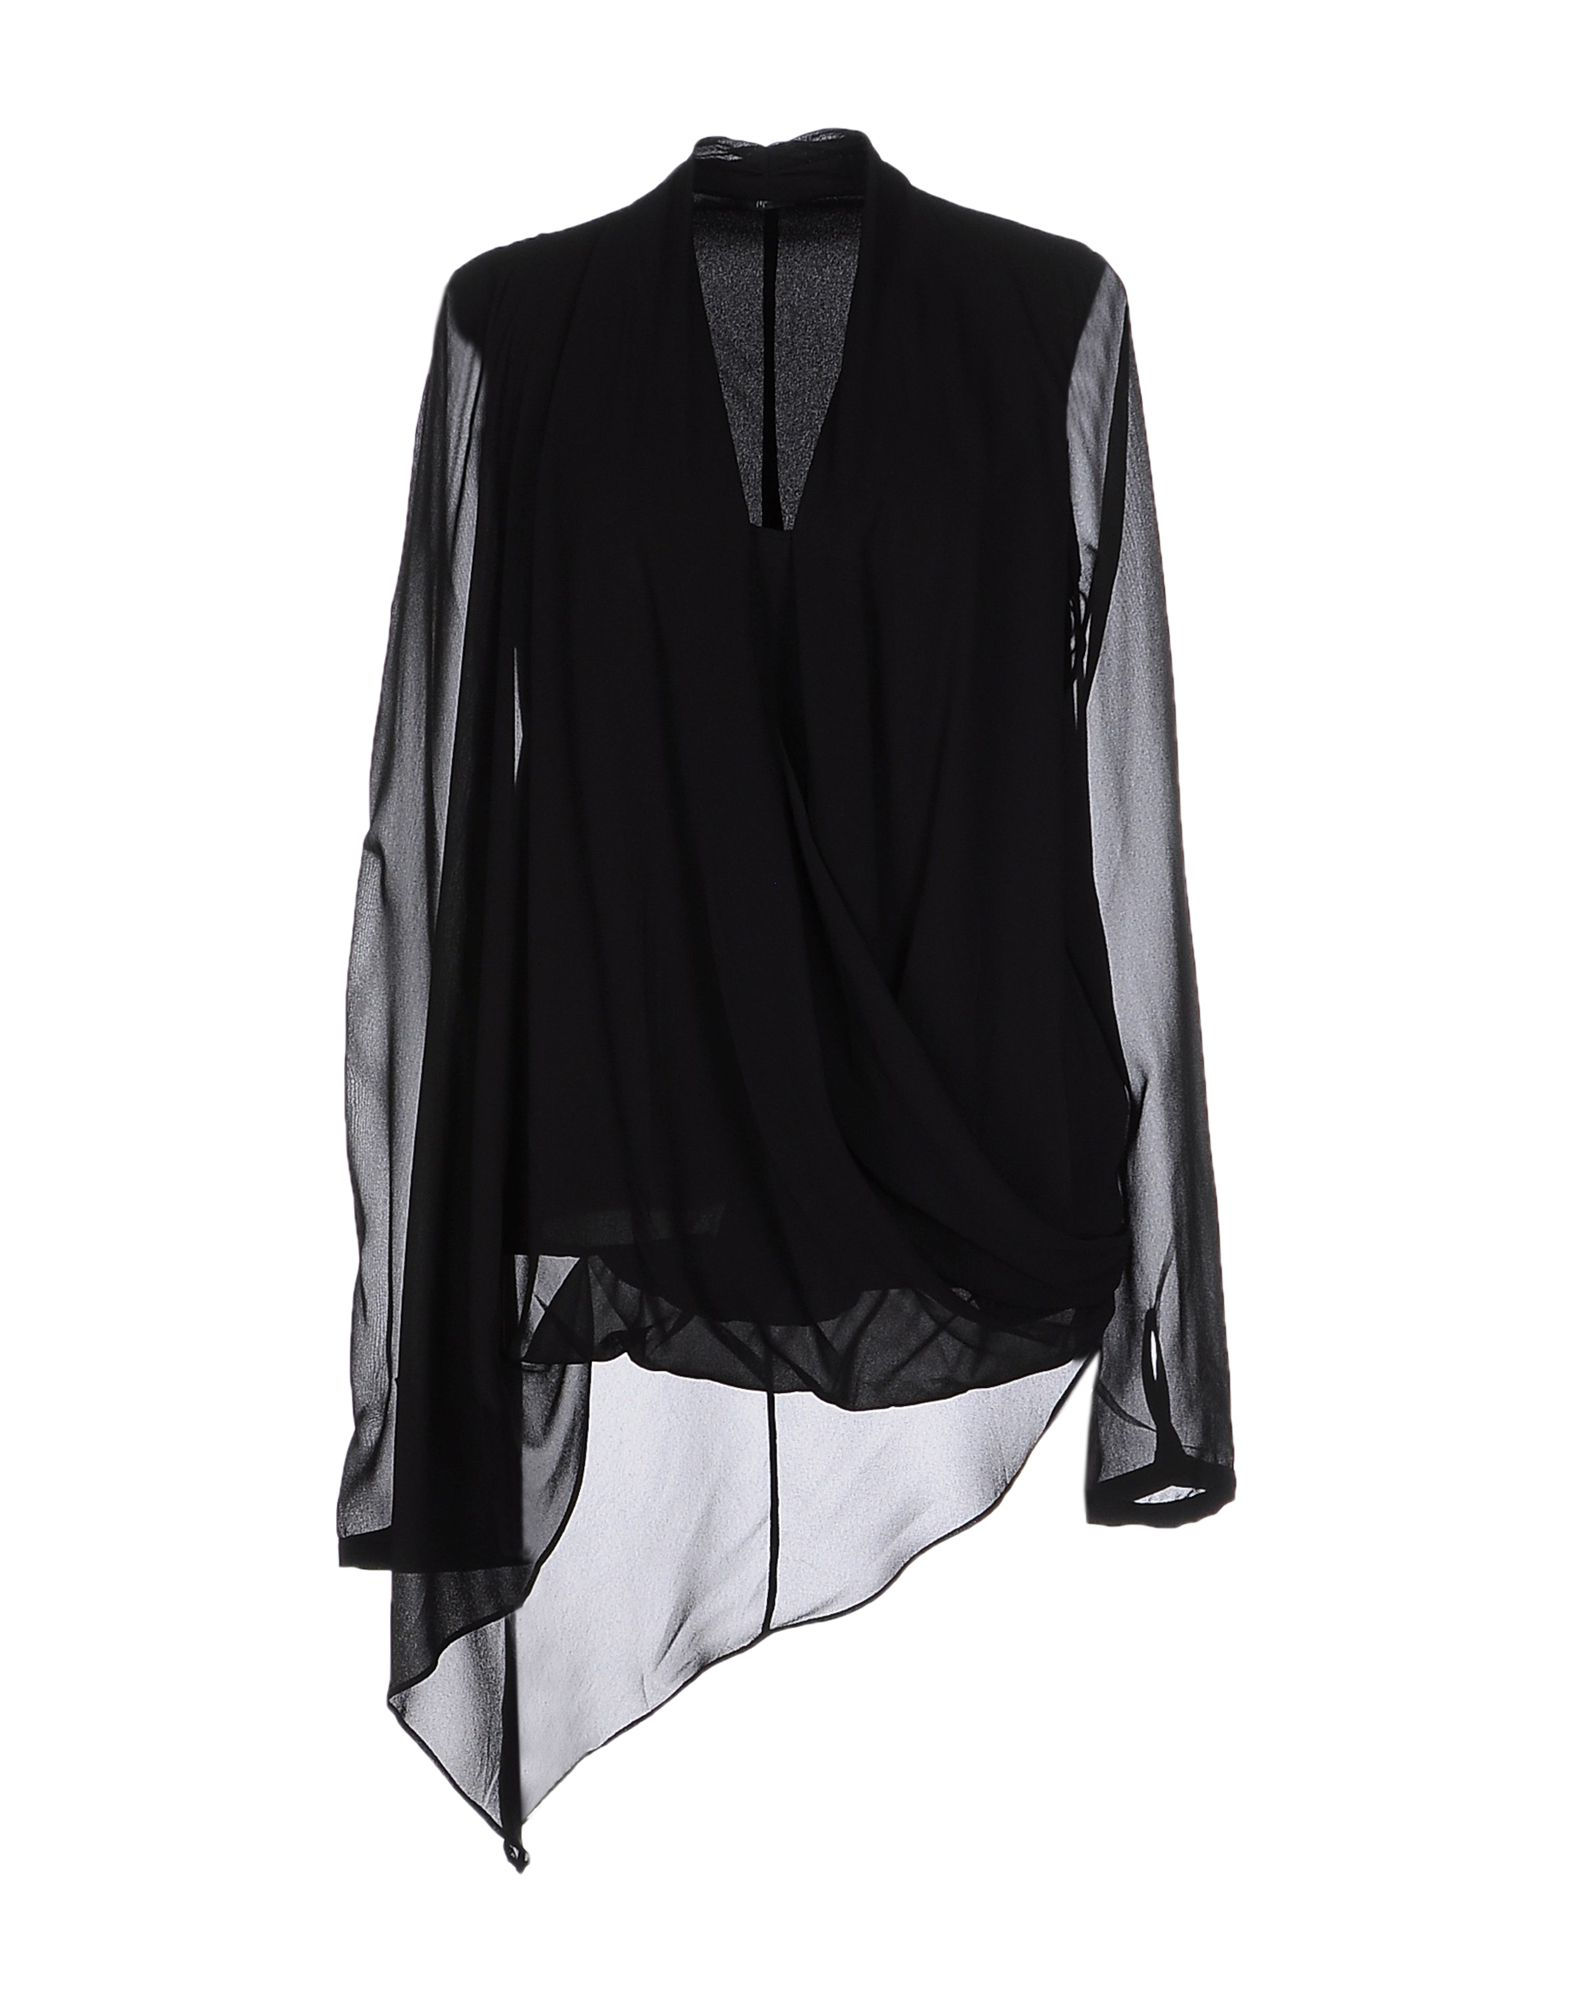 Lyst - Guess Blouse in Black